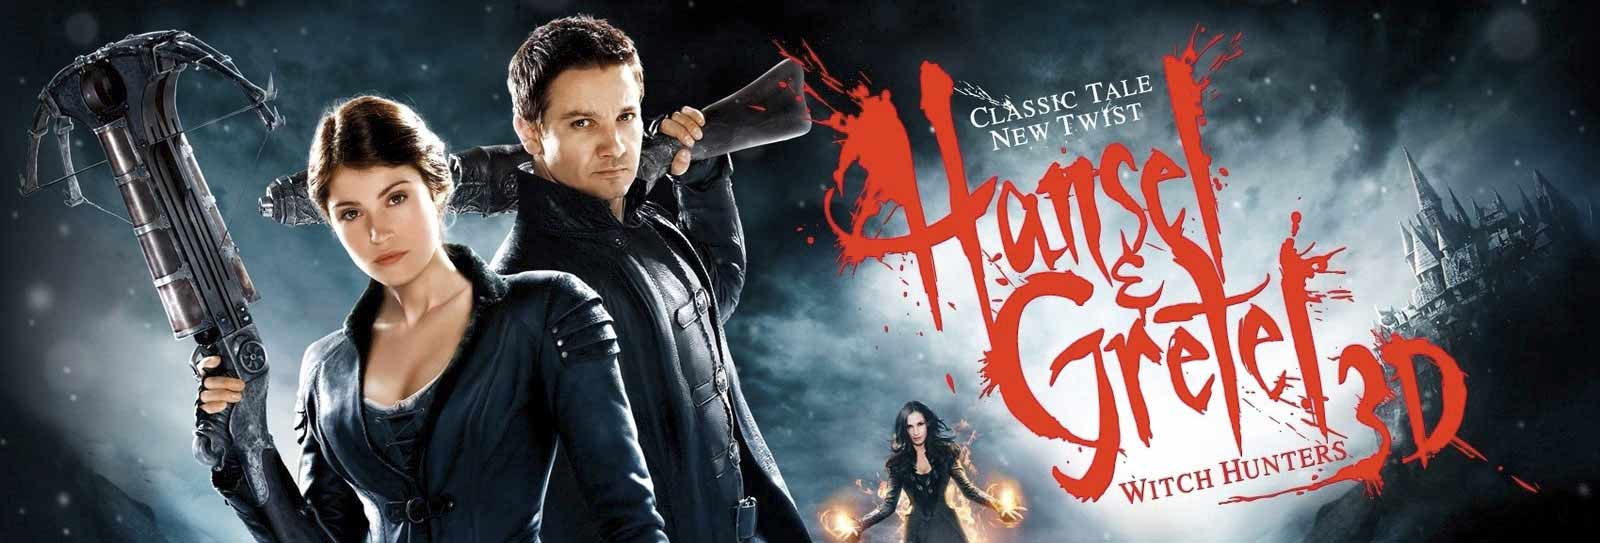 Hansel And Gretel The Witch Hunters